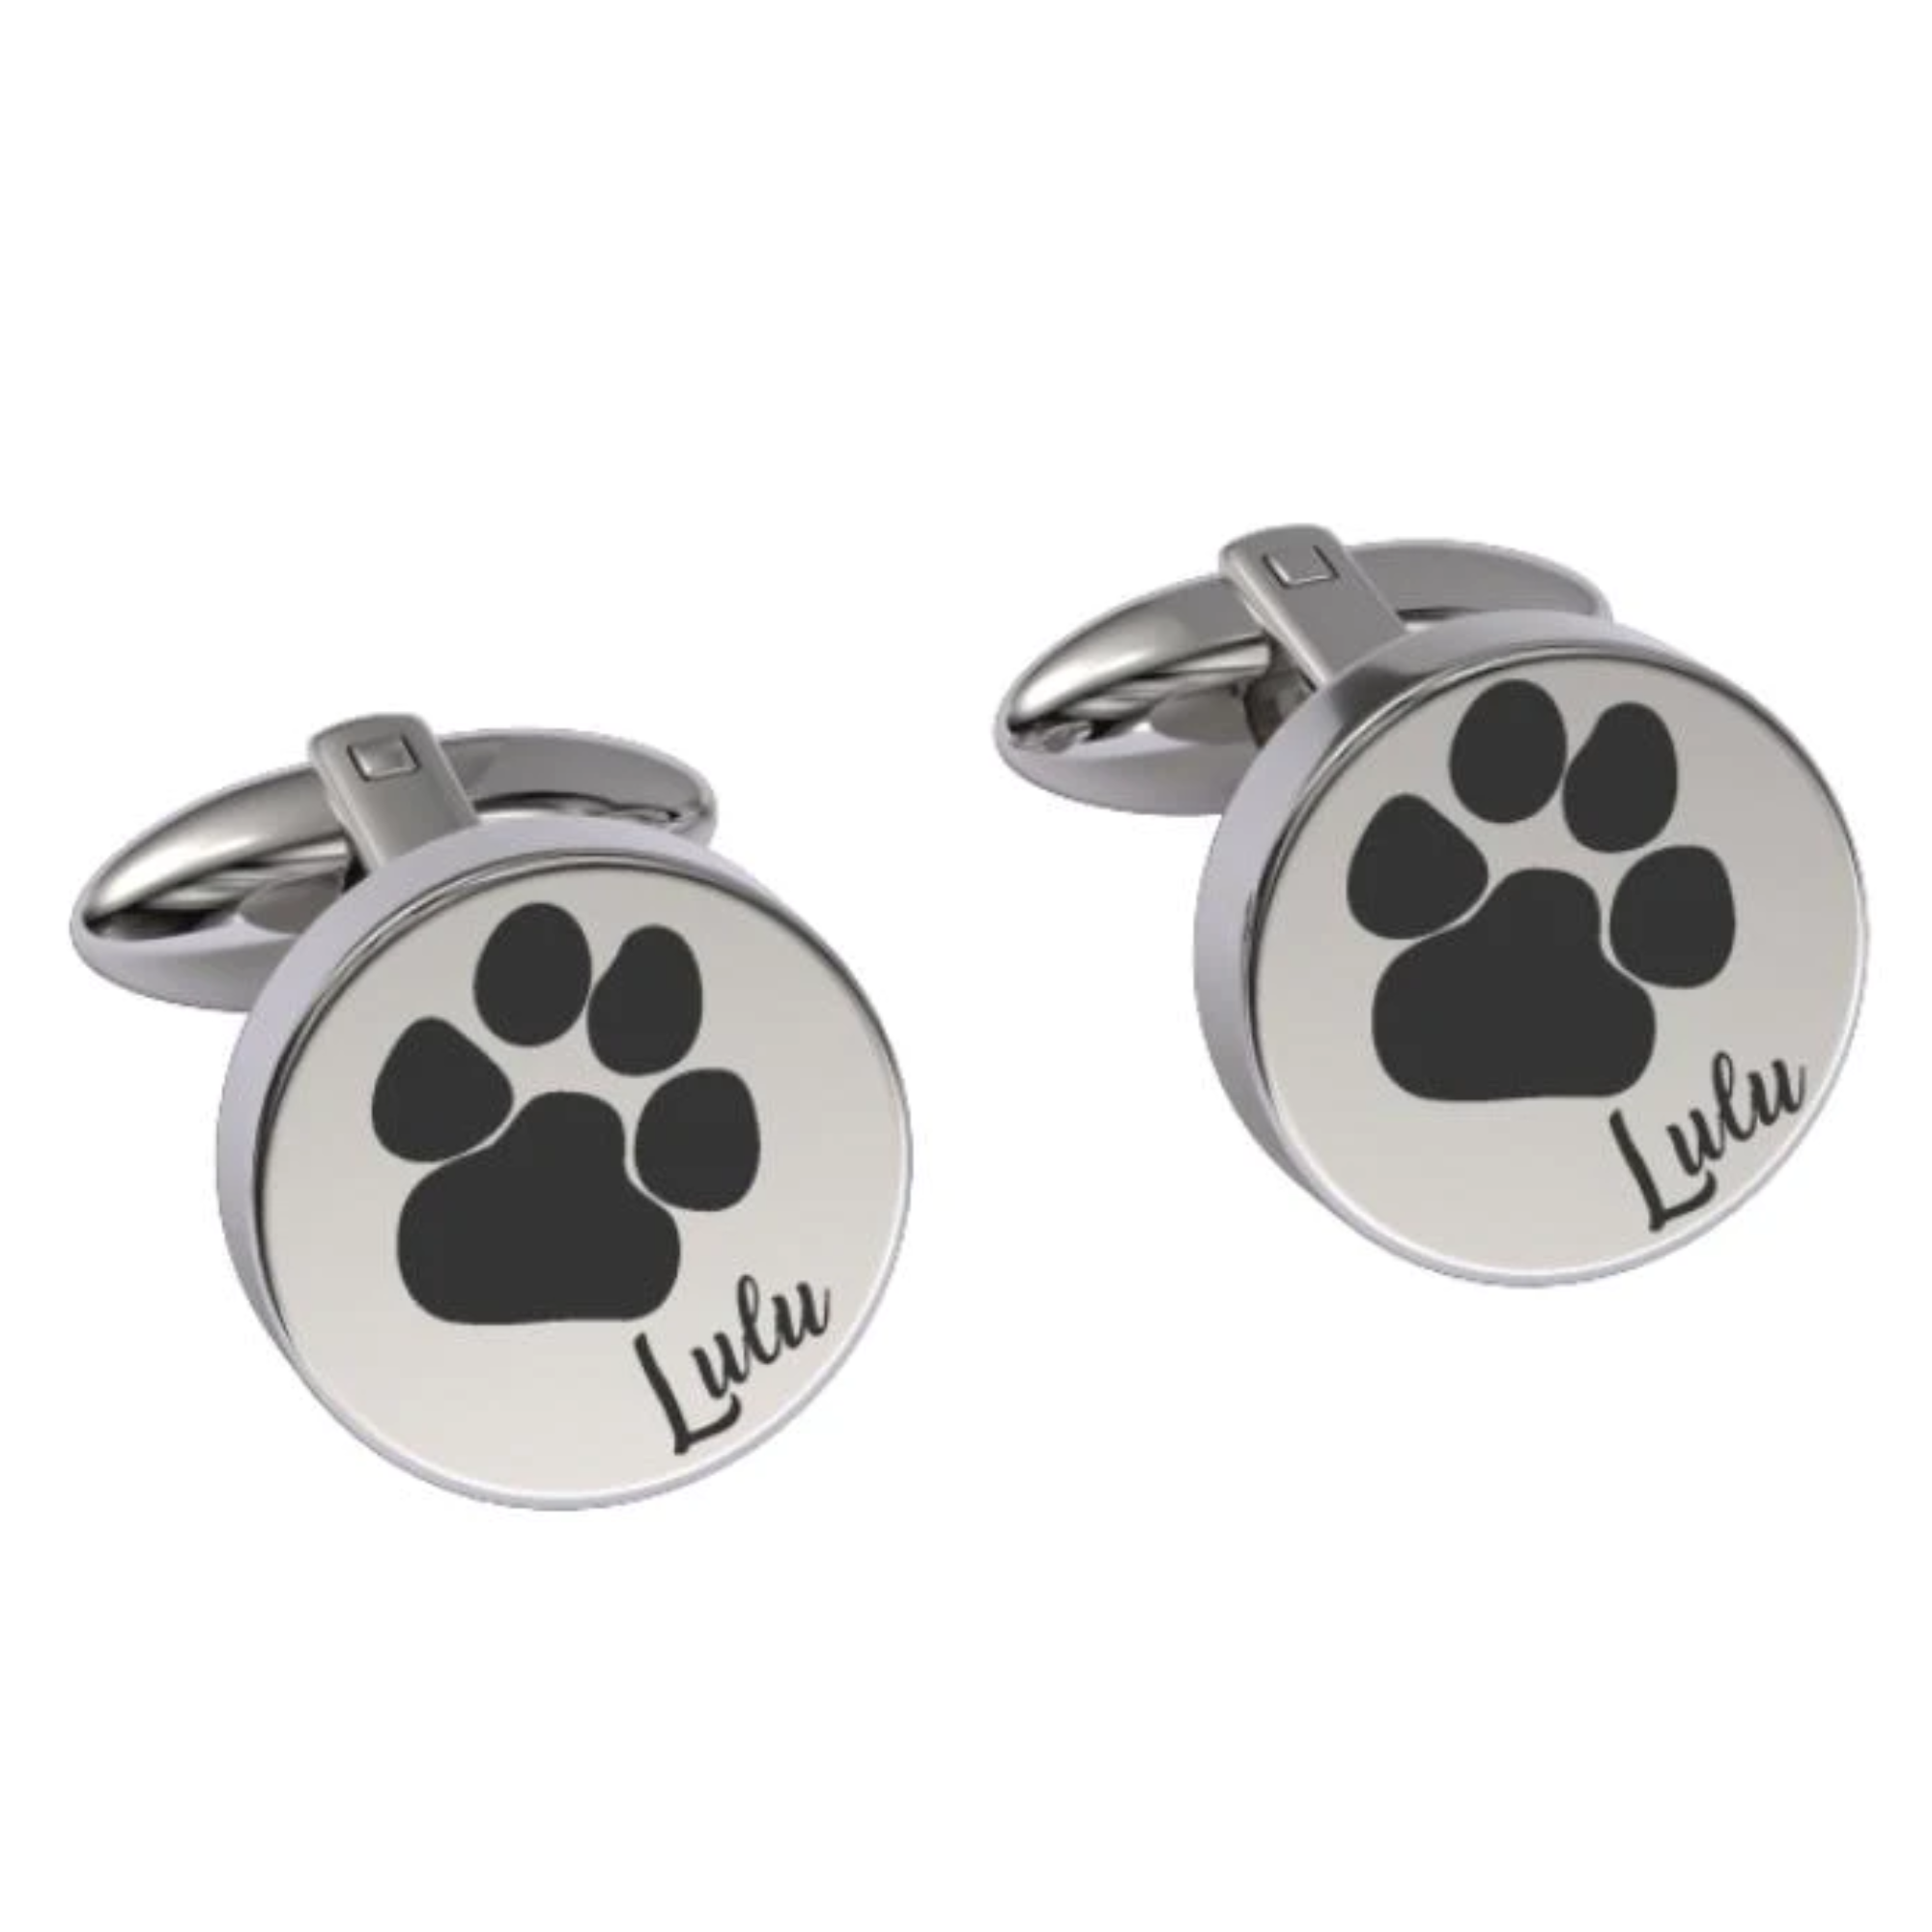 Pets Paw Print Engraved Cufflinks in Silver